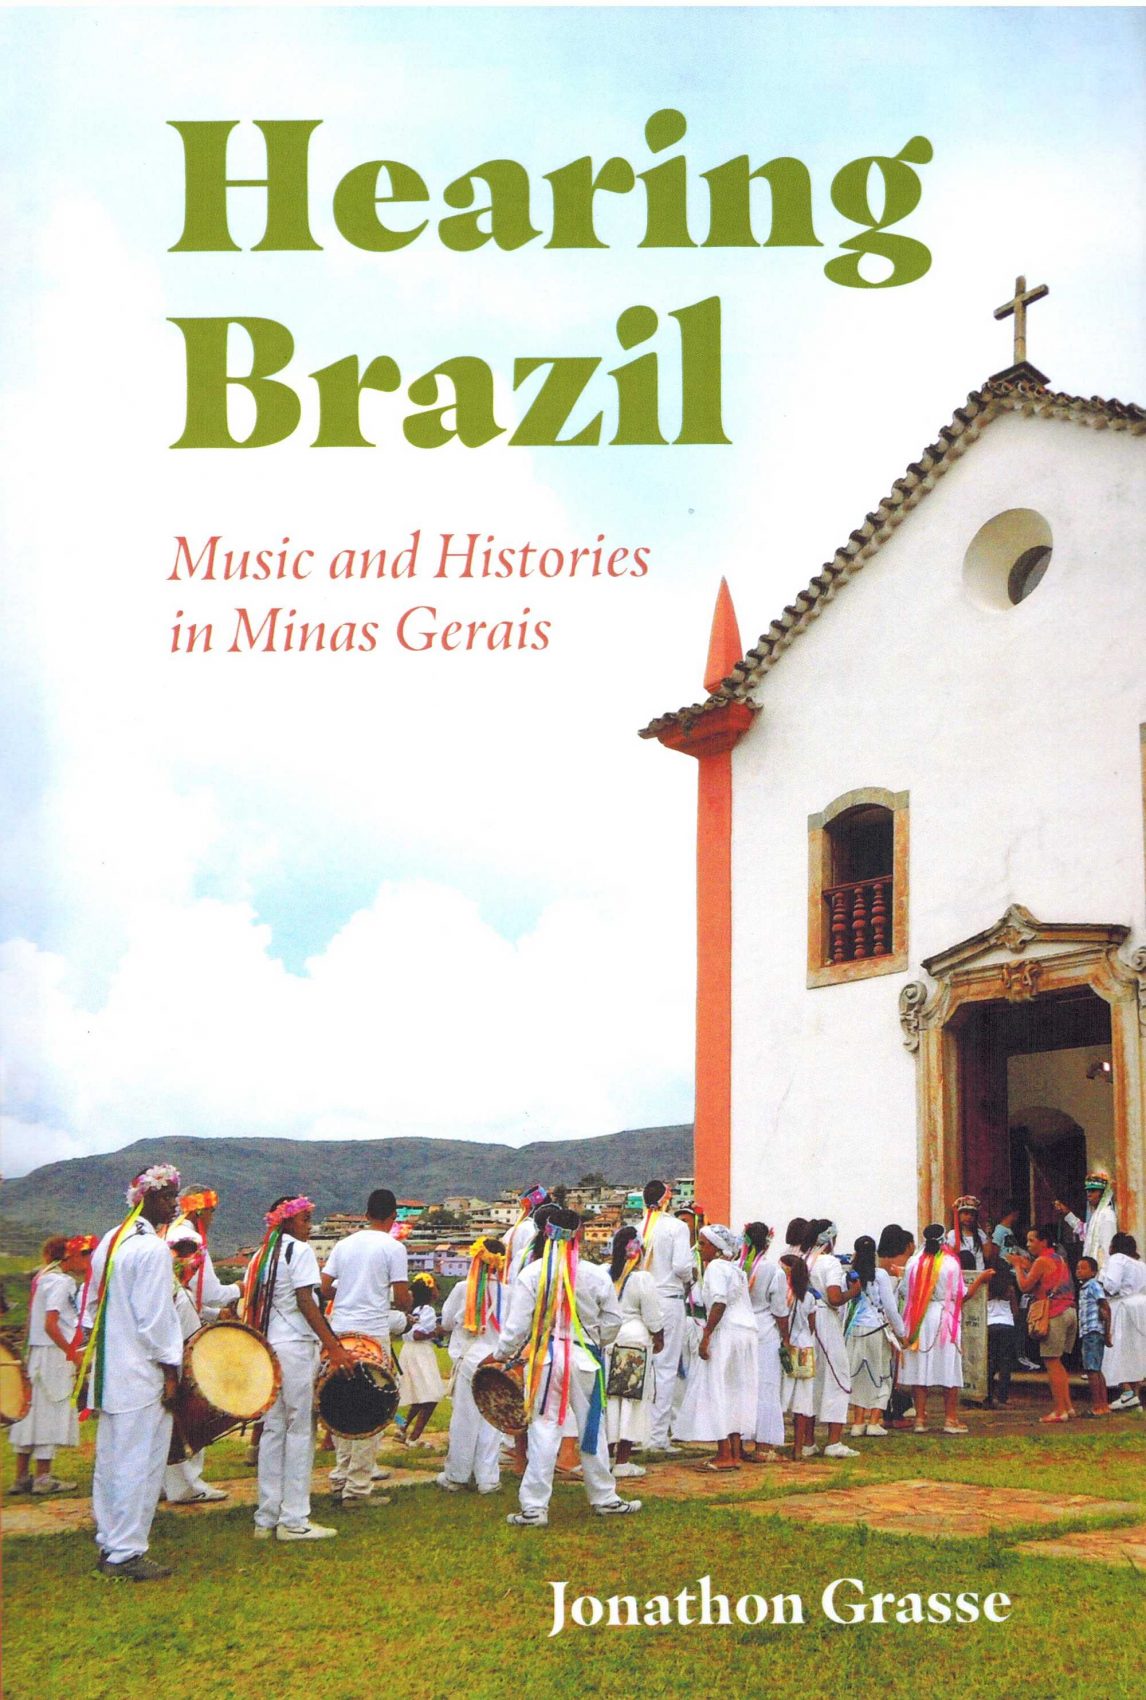 The cover of Hearing Brazil: Music and Histories in Minas Gerais